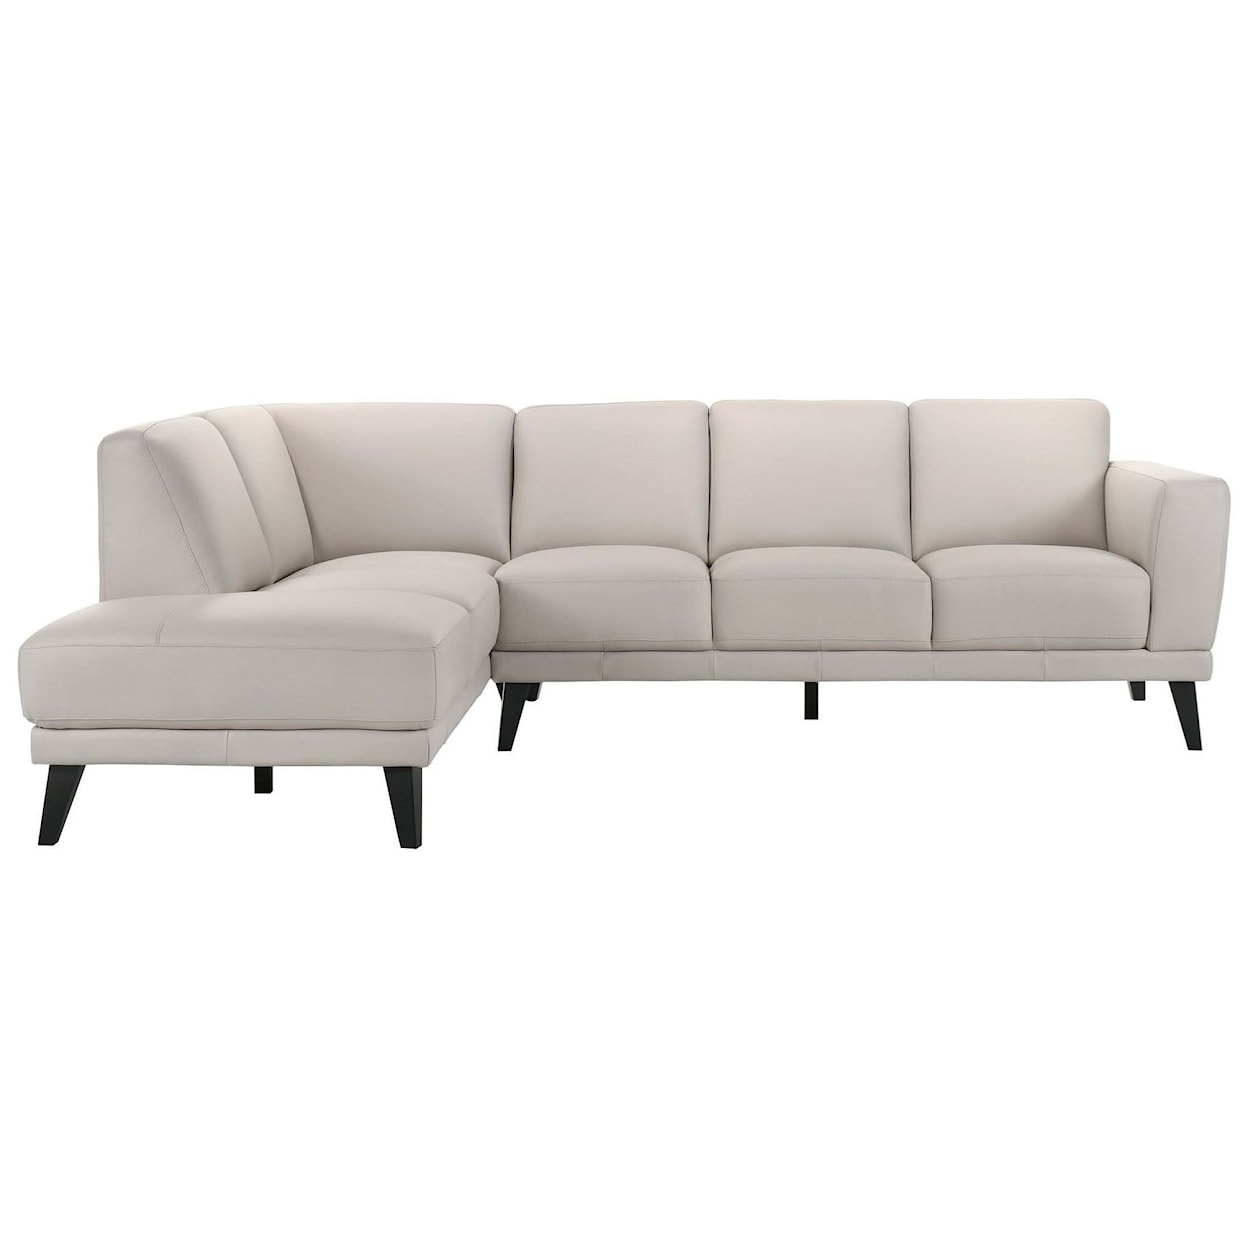 New Classic Furniture Altamura 5-Seat Sectional w/ LAF Chaise